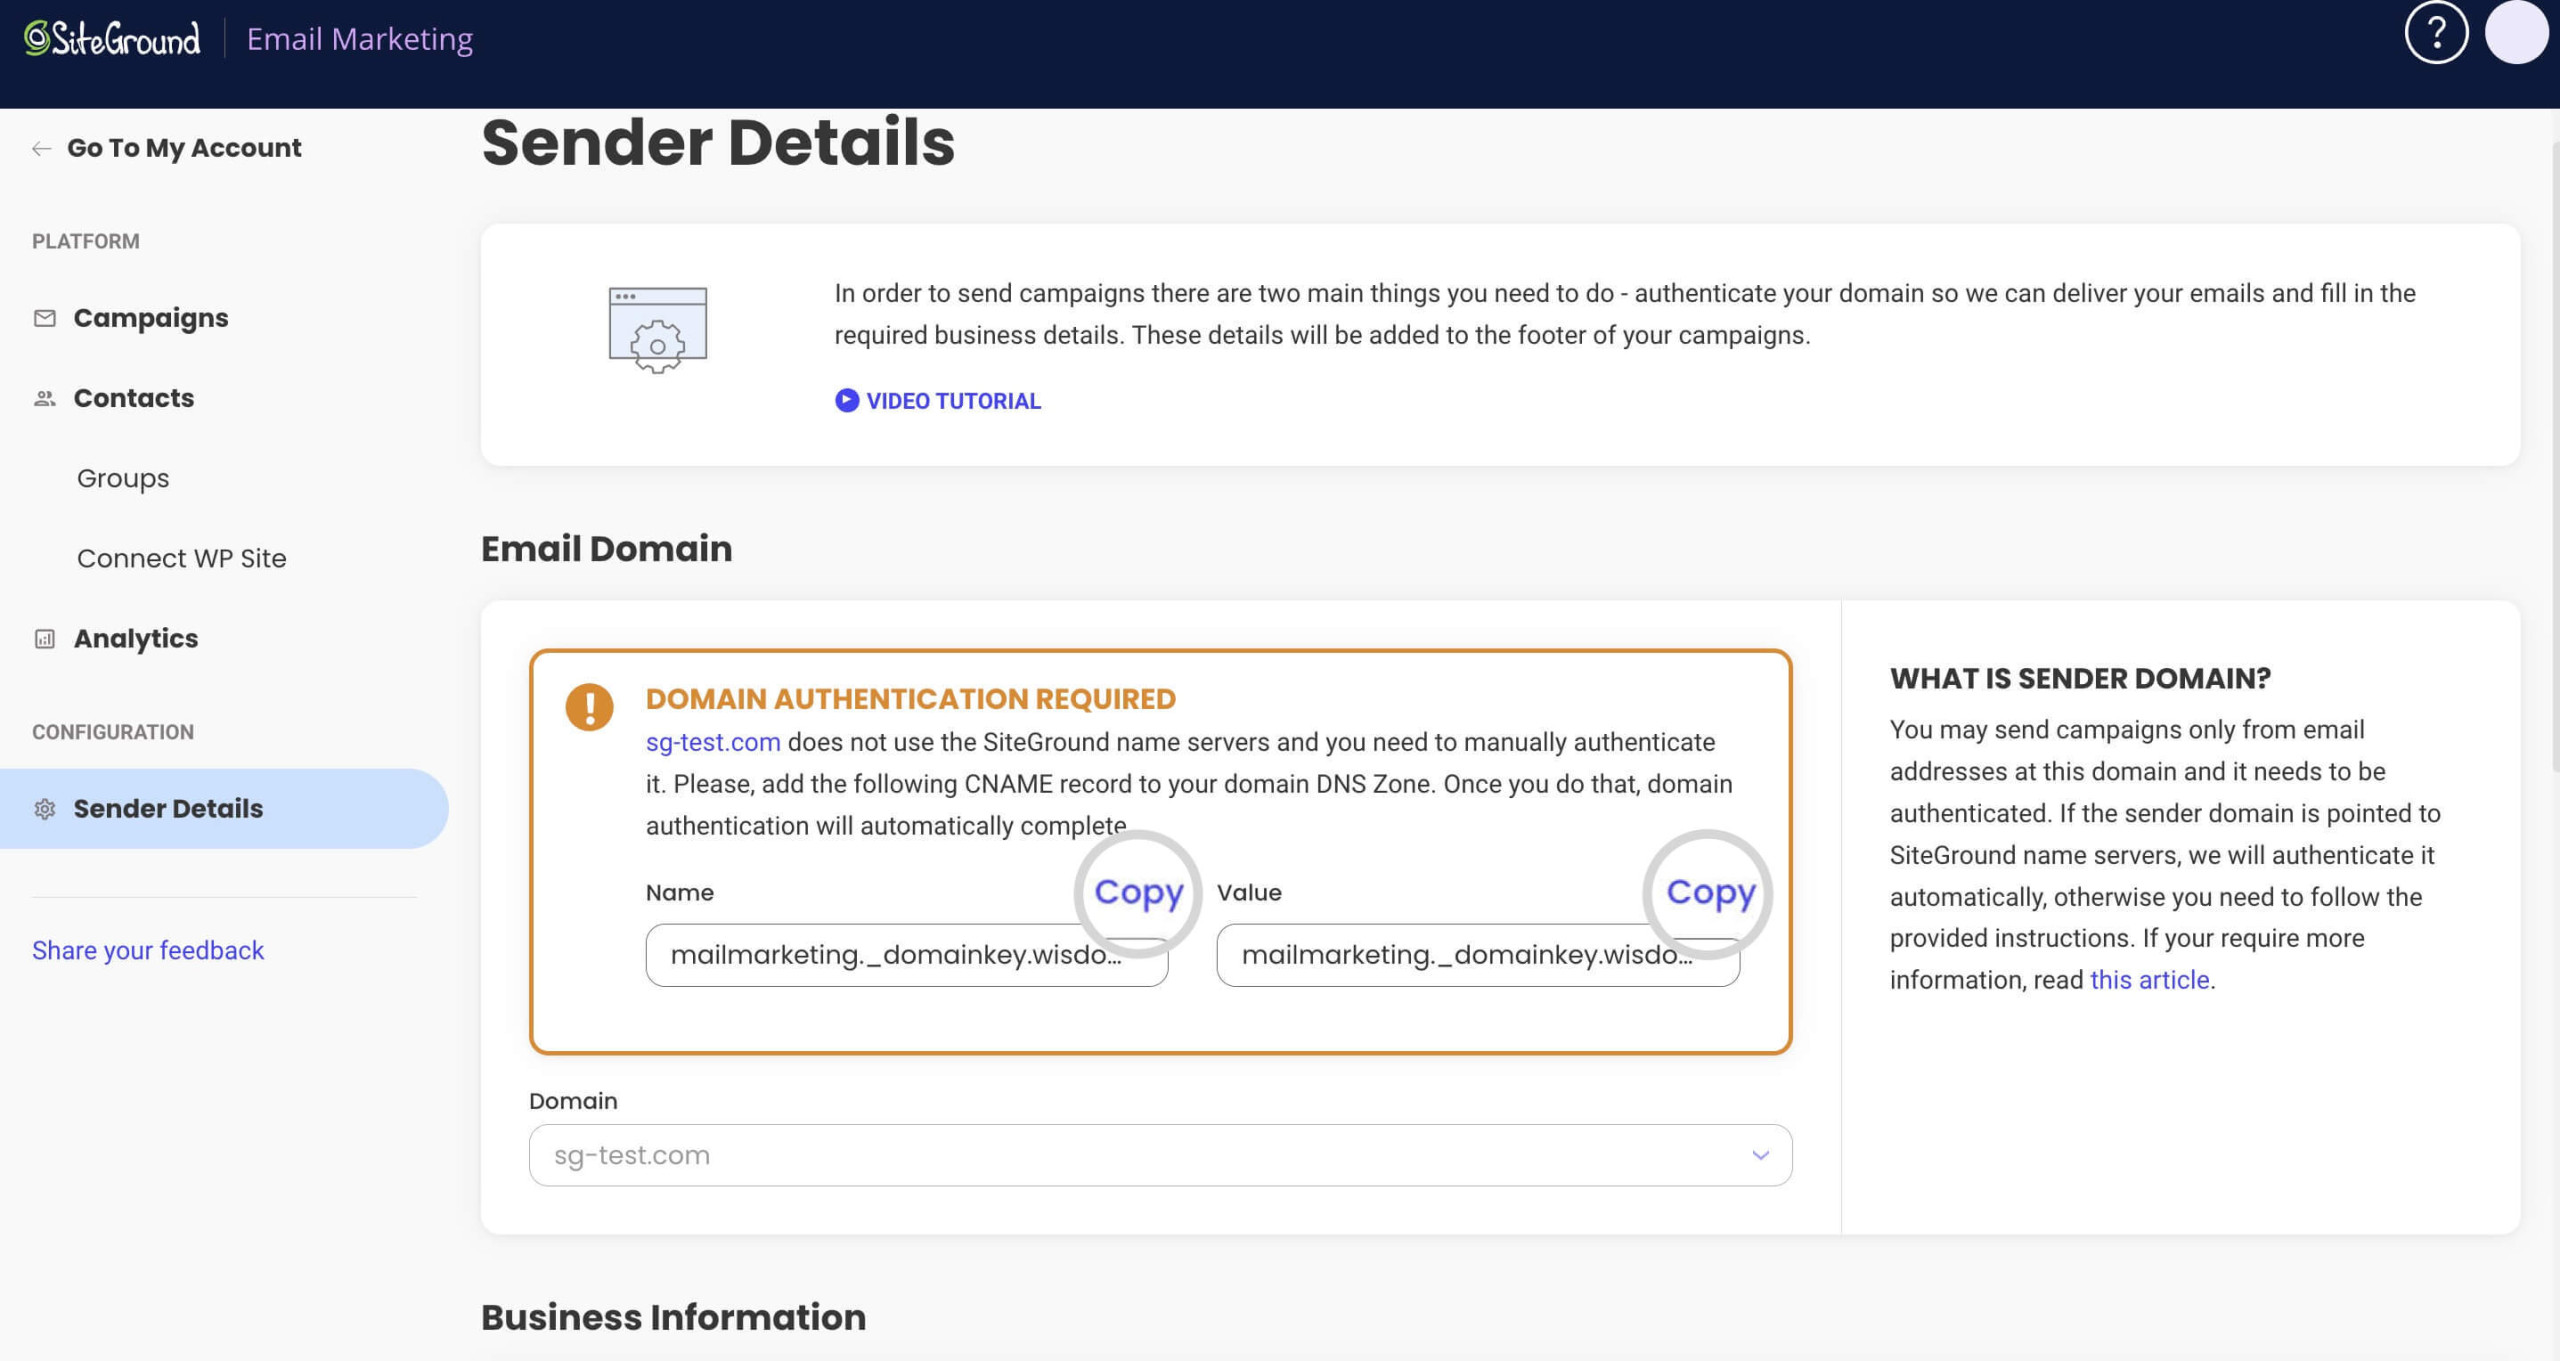 Screenshot showing the Domain Authentication Required screen where you can copy the CNAME record details